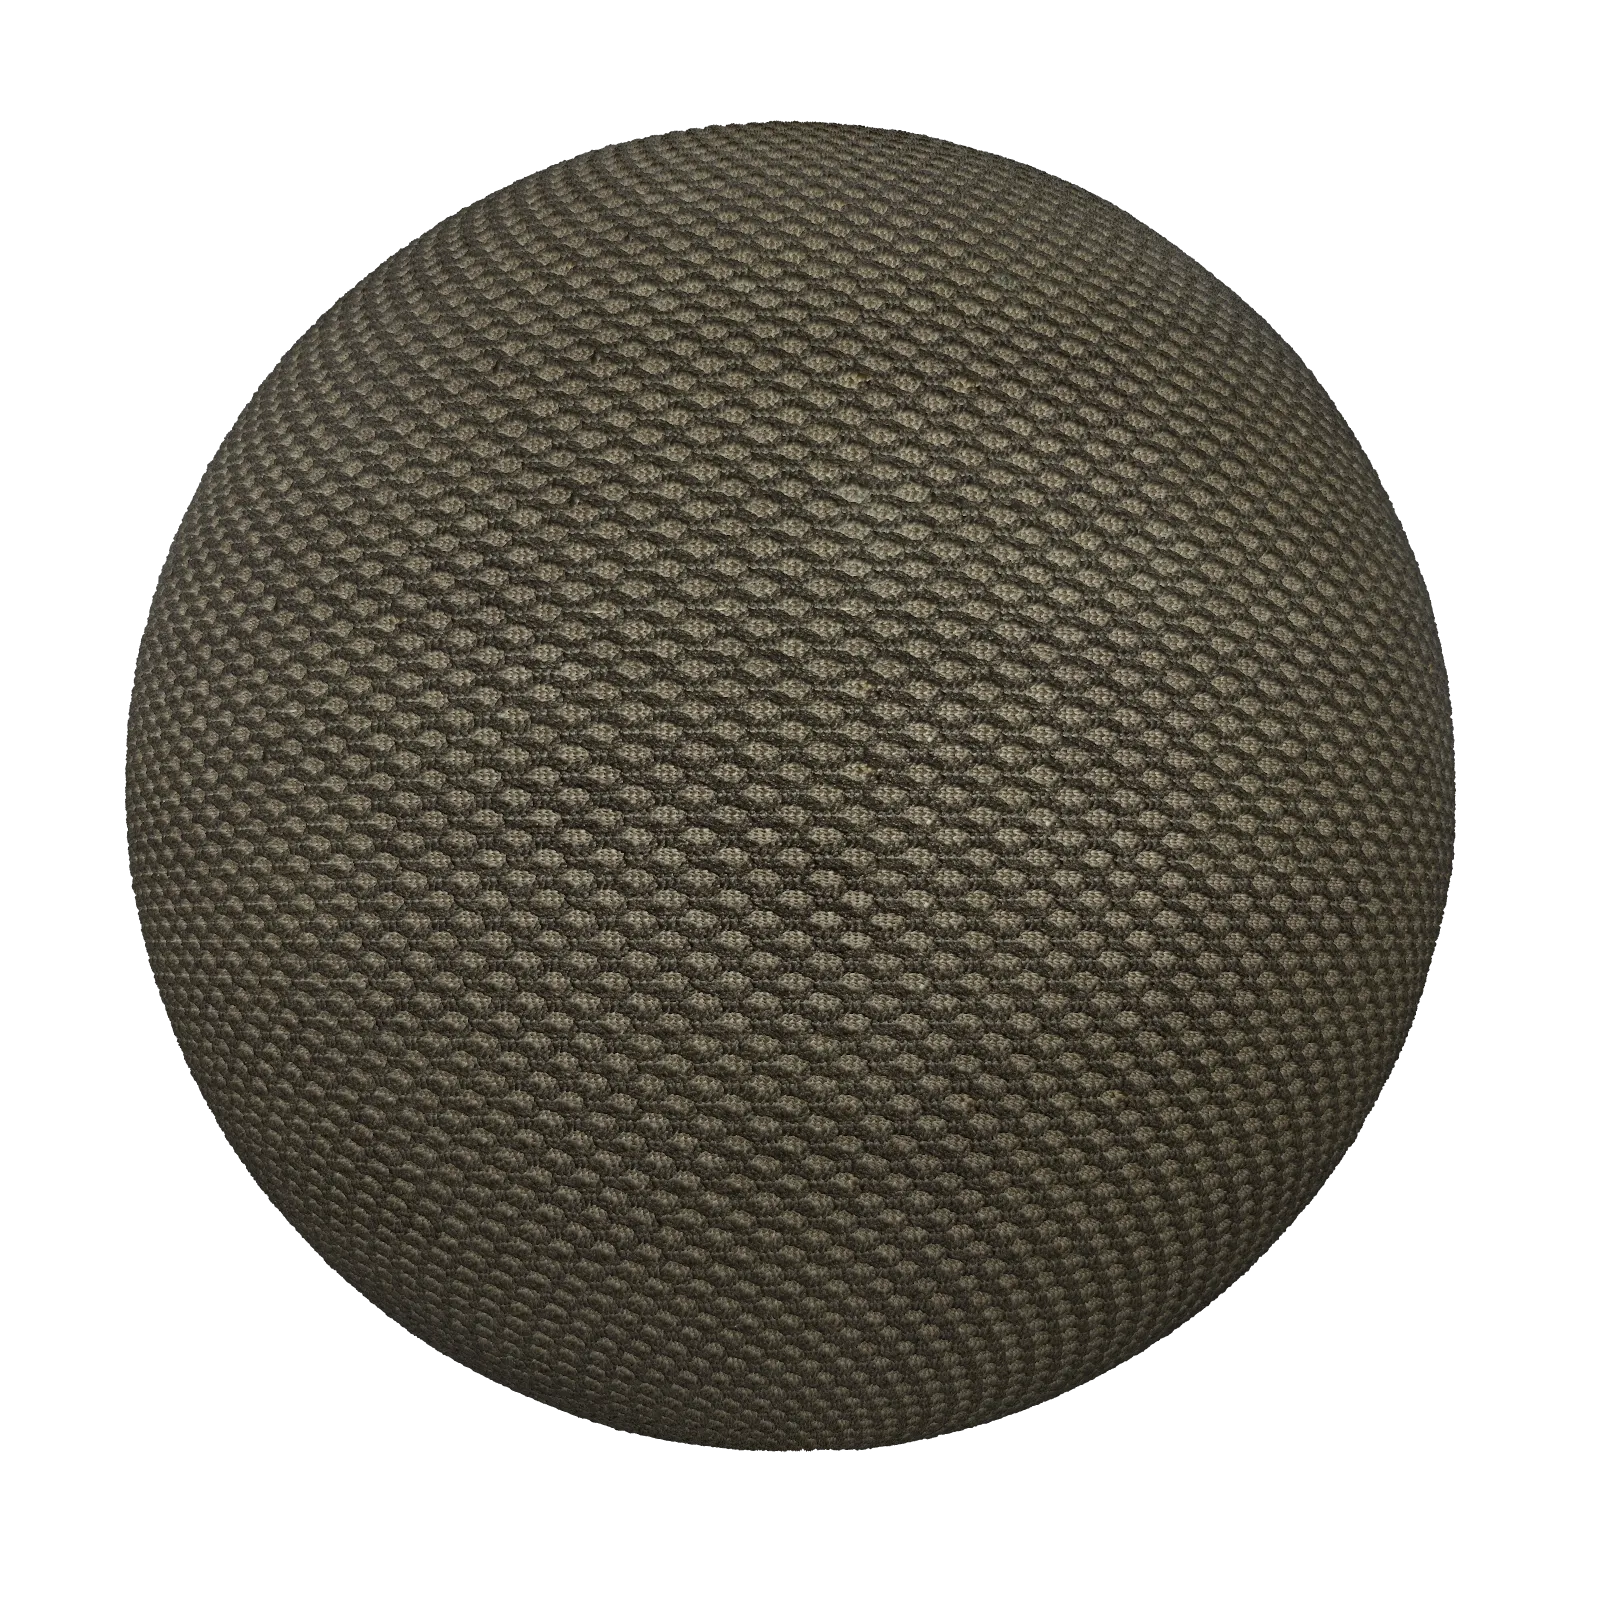 PBR CGAXIS TEXTURES – FABRICS – Patterned Fabric 06